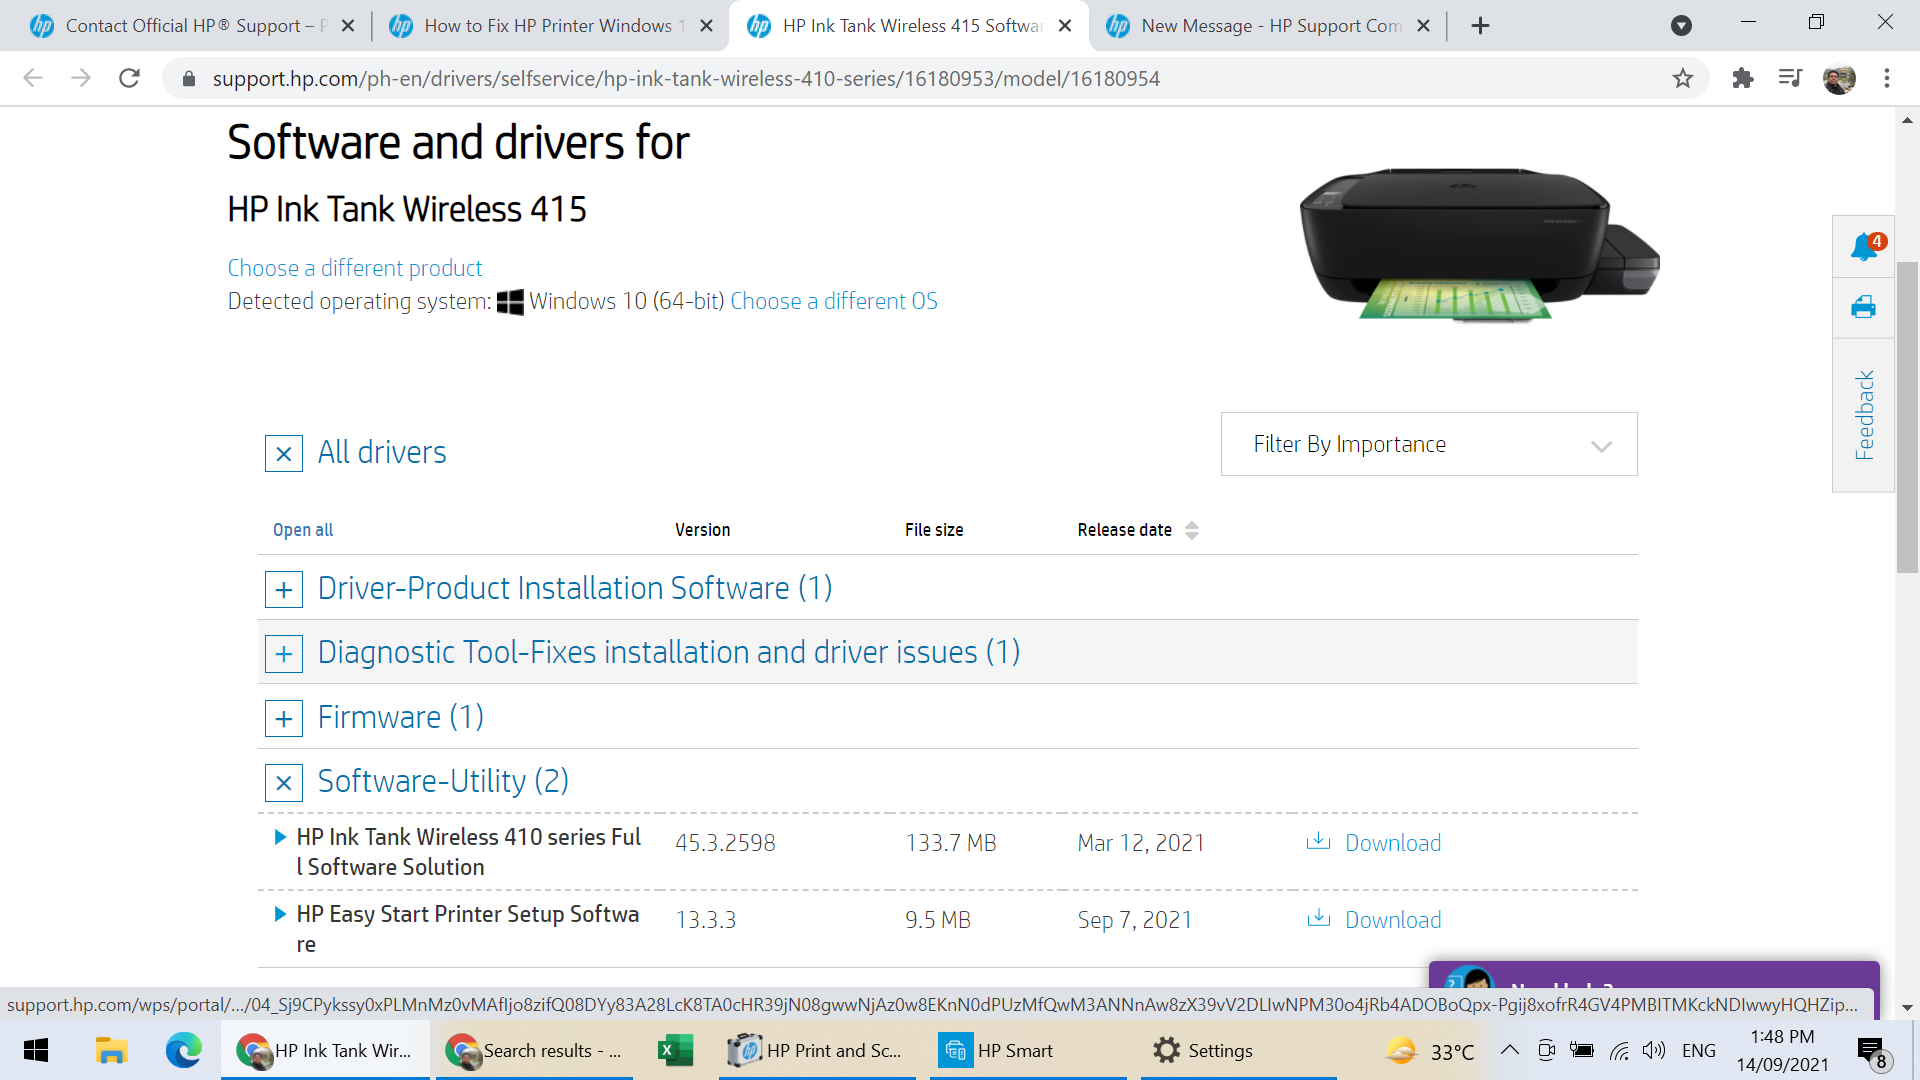 HP Ink Tank Wireless 415 Software and Driver Downloads